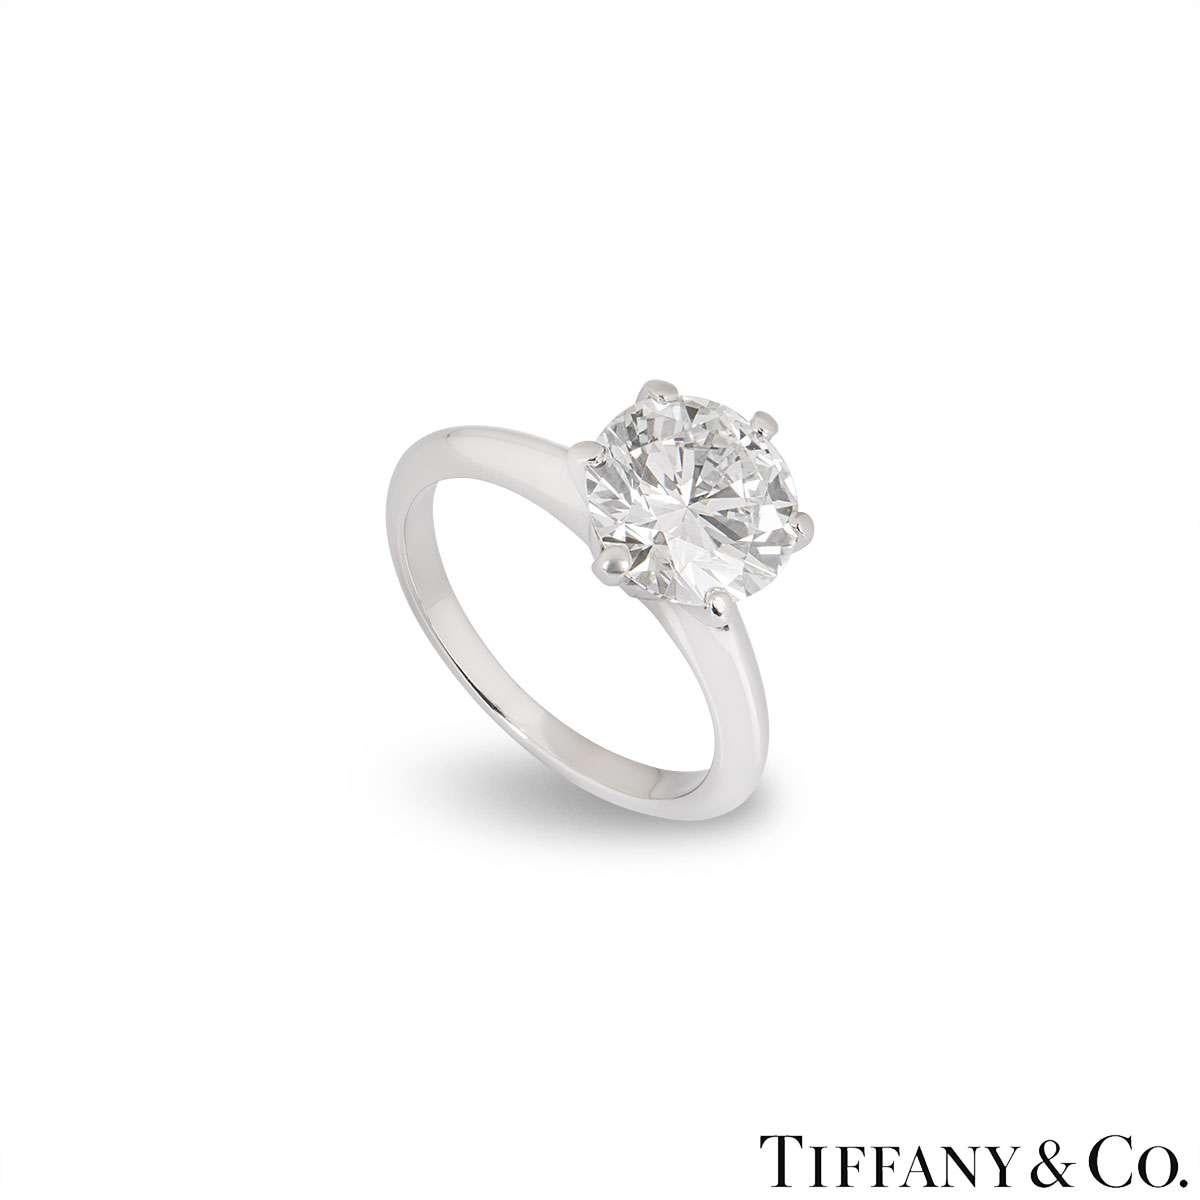 A beautiful platinum diamond ring by Tiffany & Co. from The Setting collection. The ring comprises of a round brilliant cut diamond in a 6 claw setting with a weight of 2.35ct, I colour and VVS2 clarity. The ring is a size UK J / EU 49 / UK 5 1/4